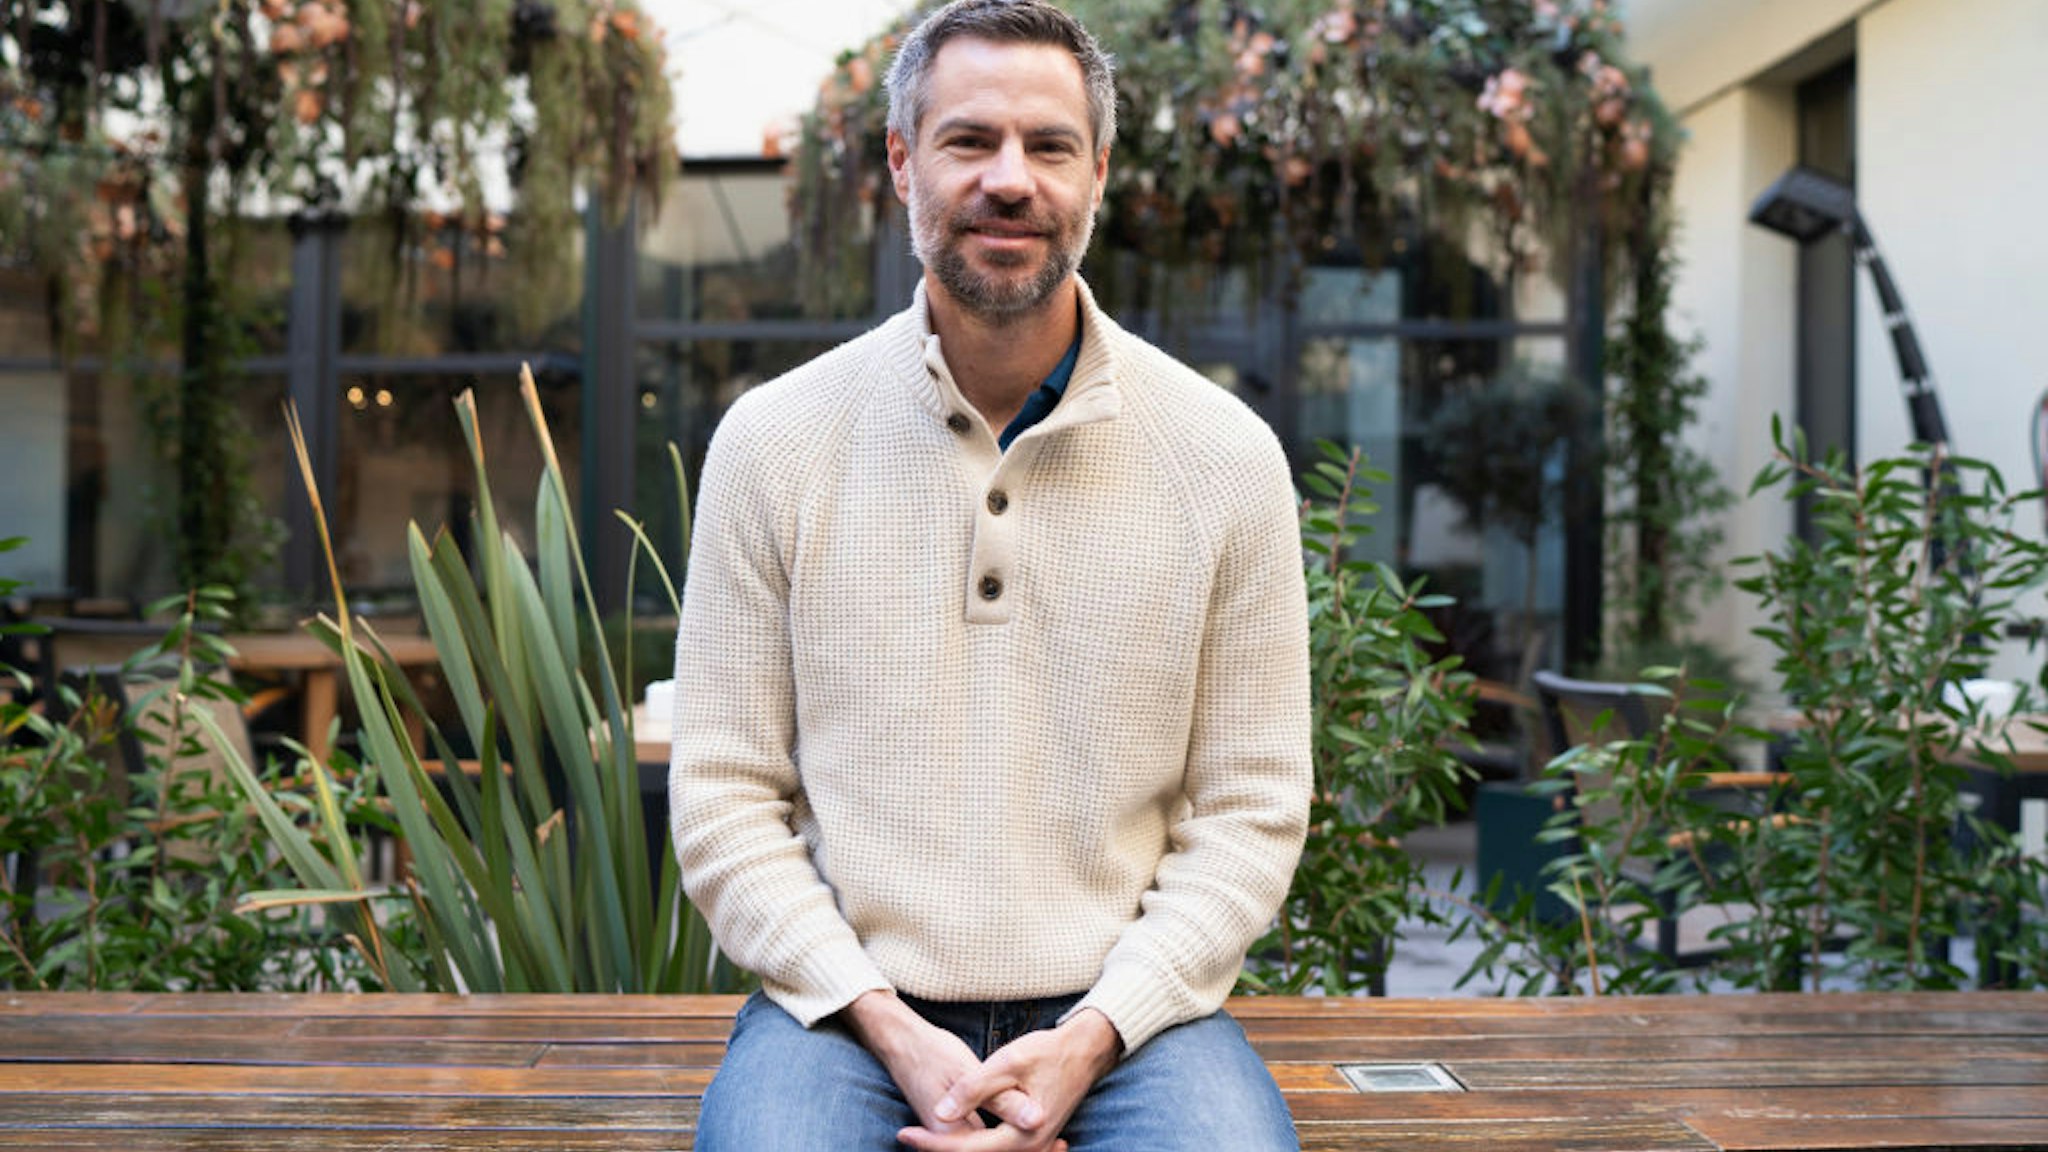 The American writer environmental policies, Michael Shellenberger poses during the session of portraits in Madrid, Spain. February 25, 2019